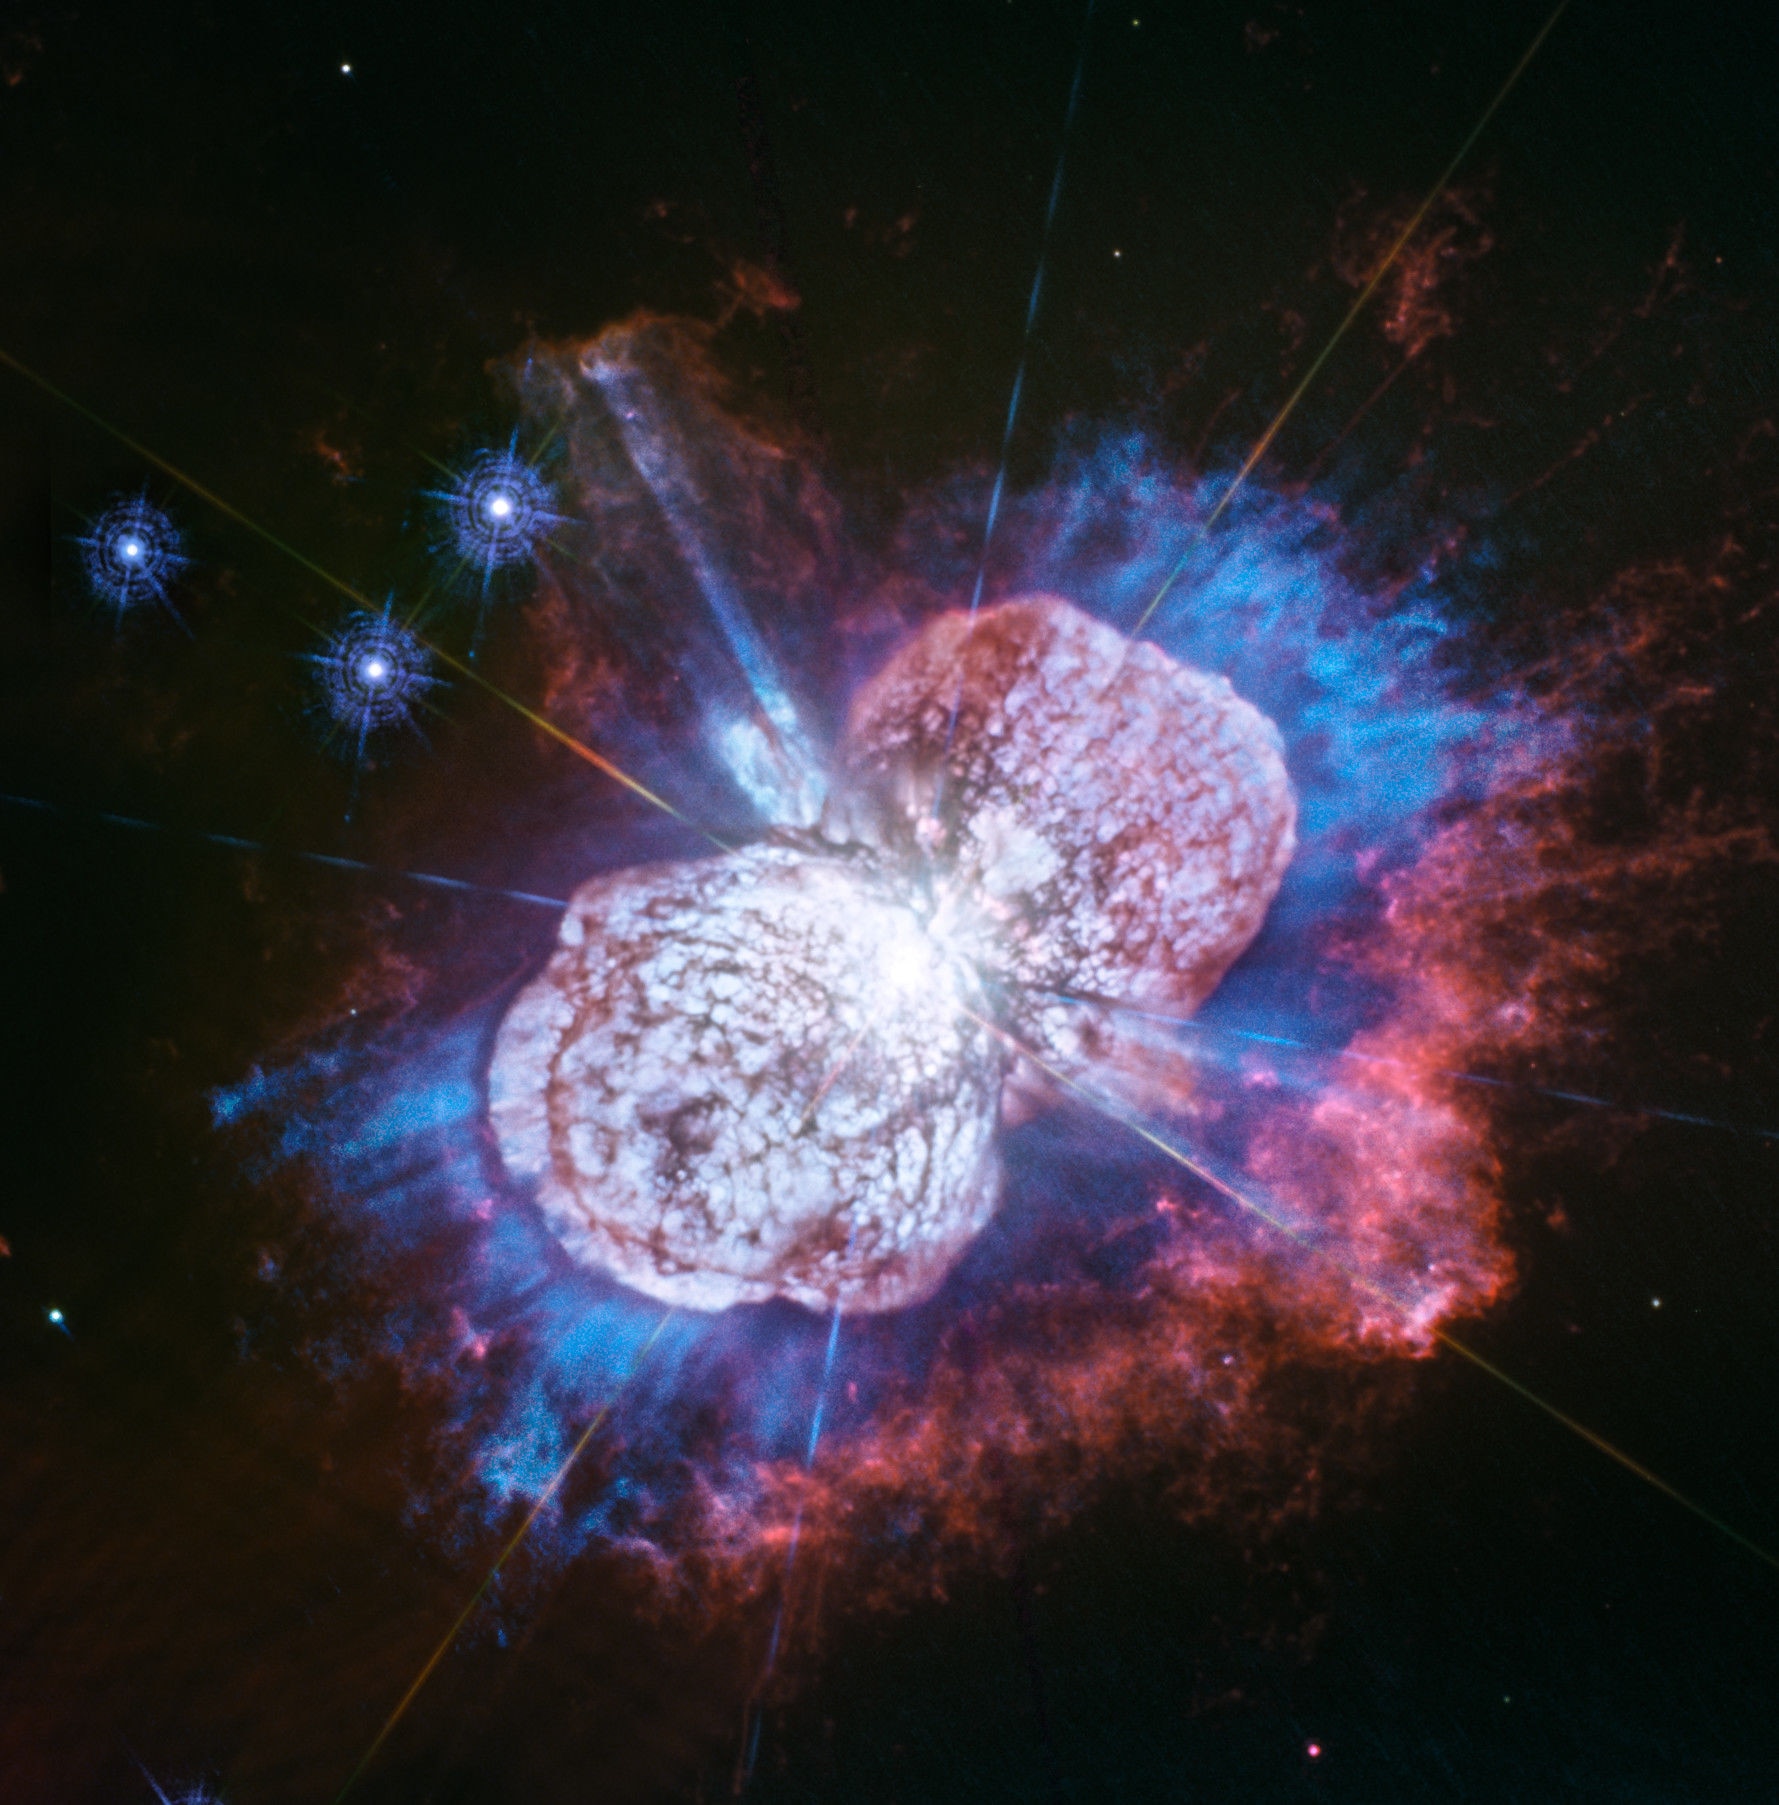 The mighty star Eta Carinae (actually a binary star), one of the most massive and luminous stars in the galaxy. Credit: NASA, ESA, N. Smith (University of Arizona, Tucson), and J. Morse (BoldlyGo Institute, New York)